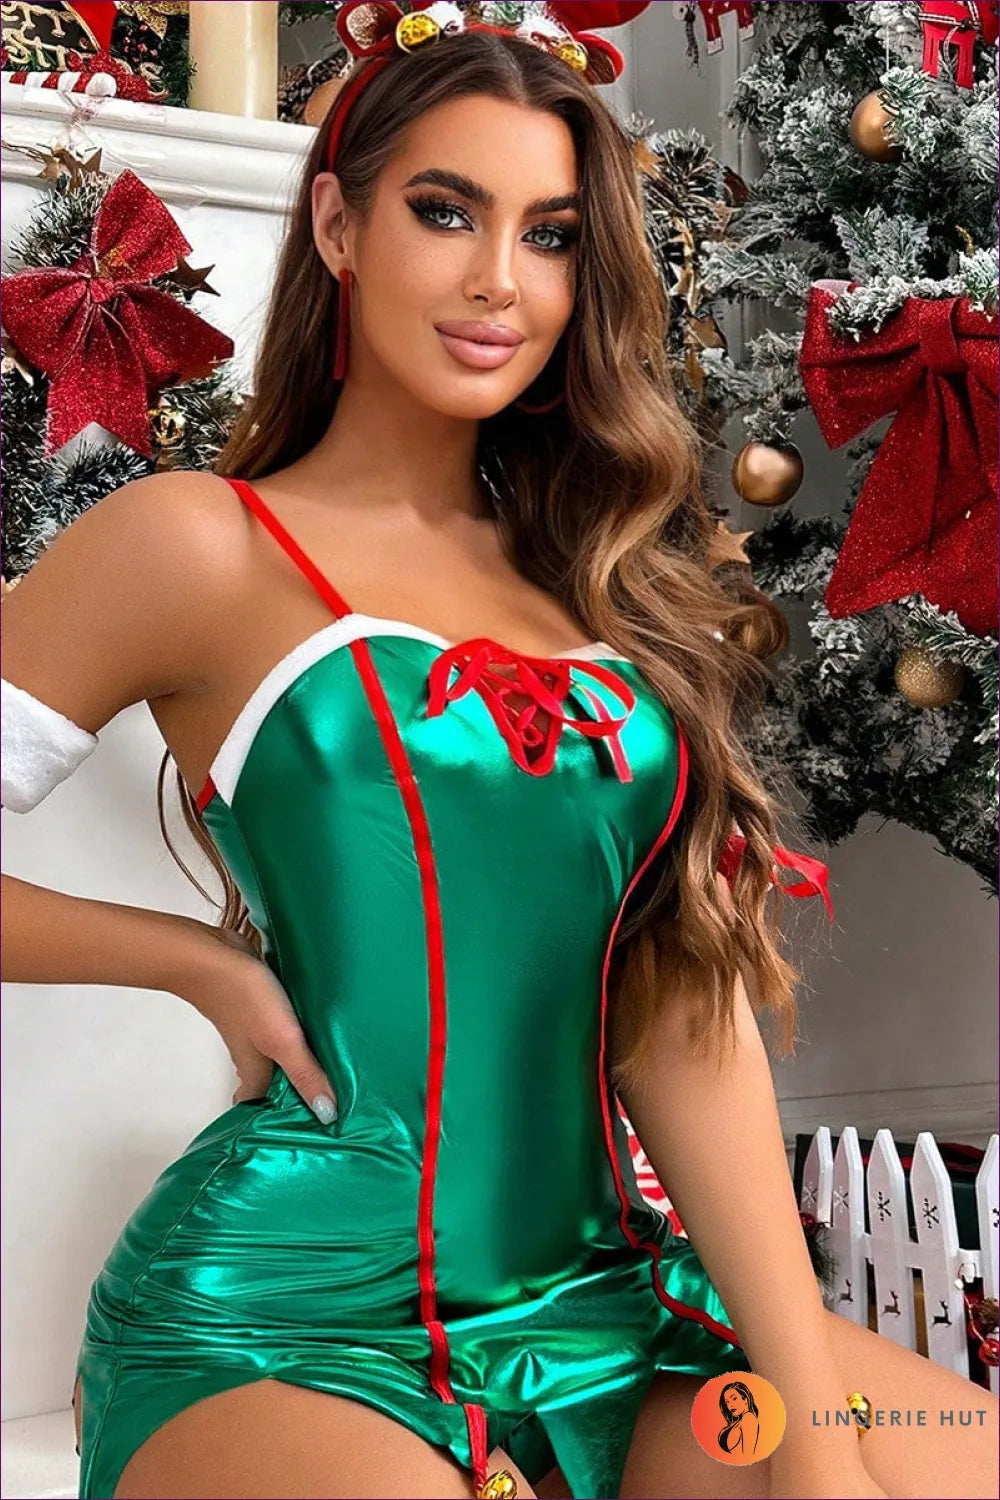 Wrap Yourself In The Spirit Of Season With Lingerie Hut’s Bronzing Christmas Nightdress - Your Festive